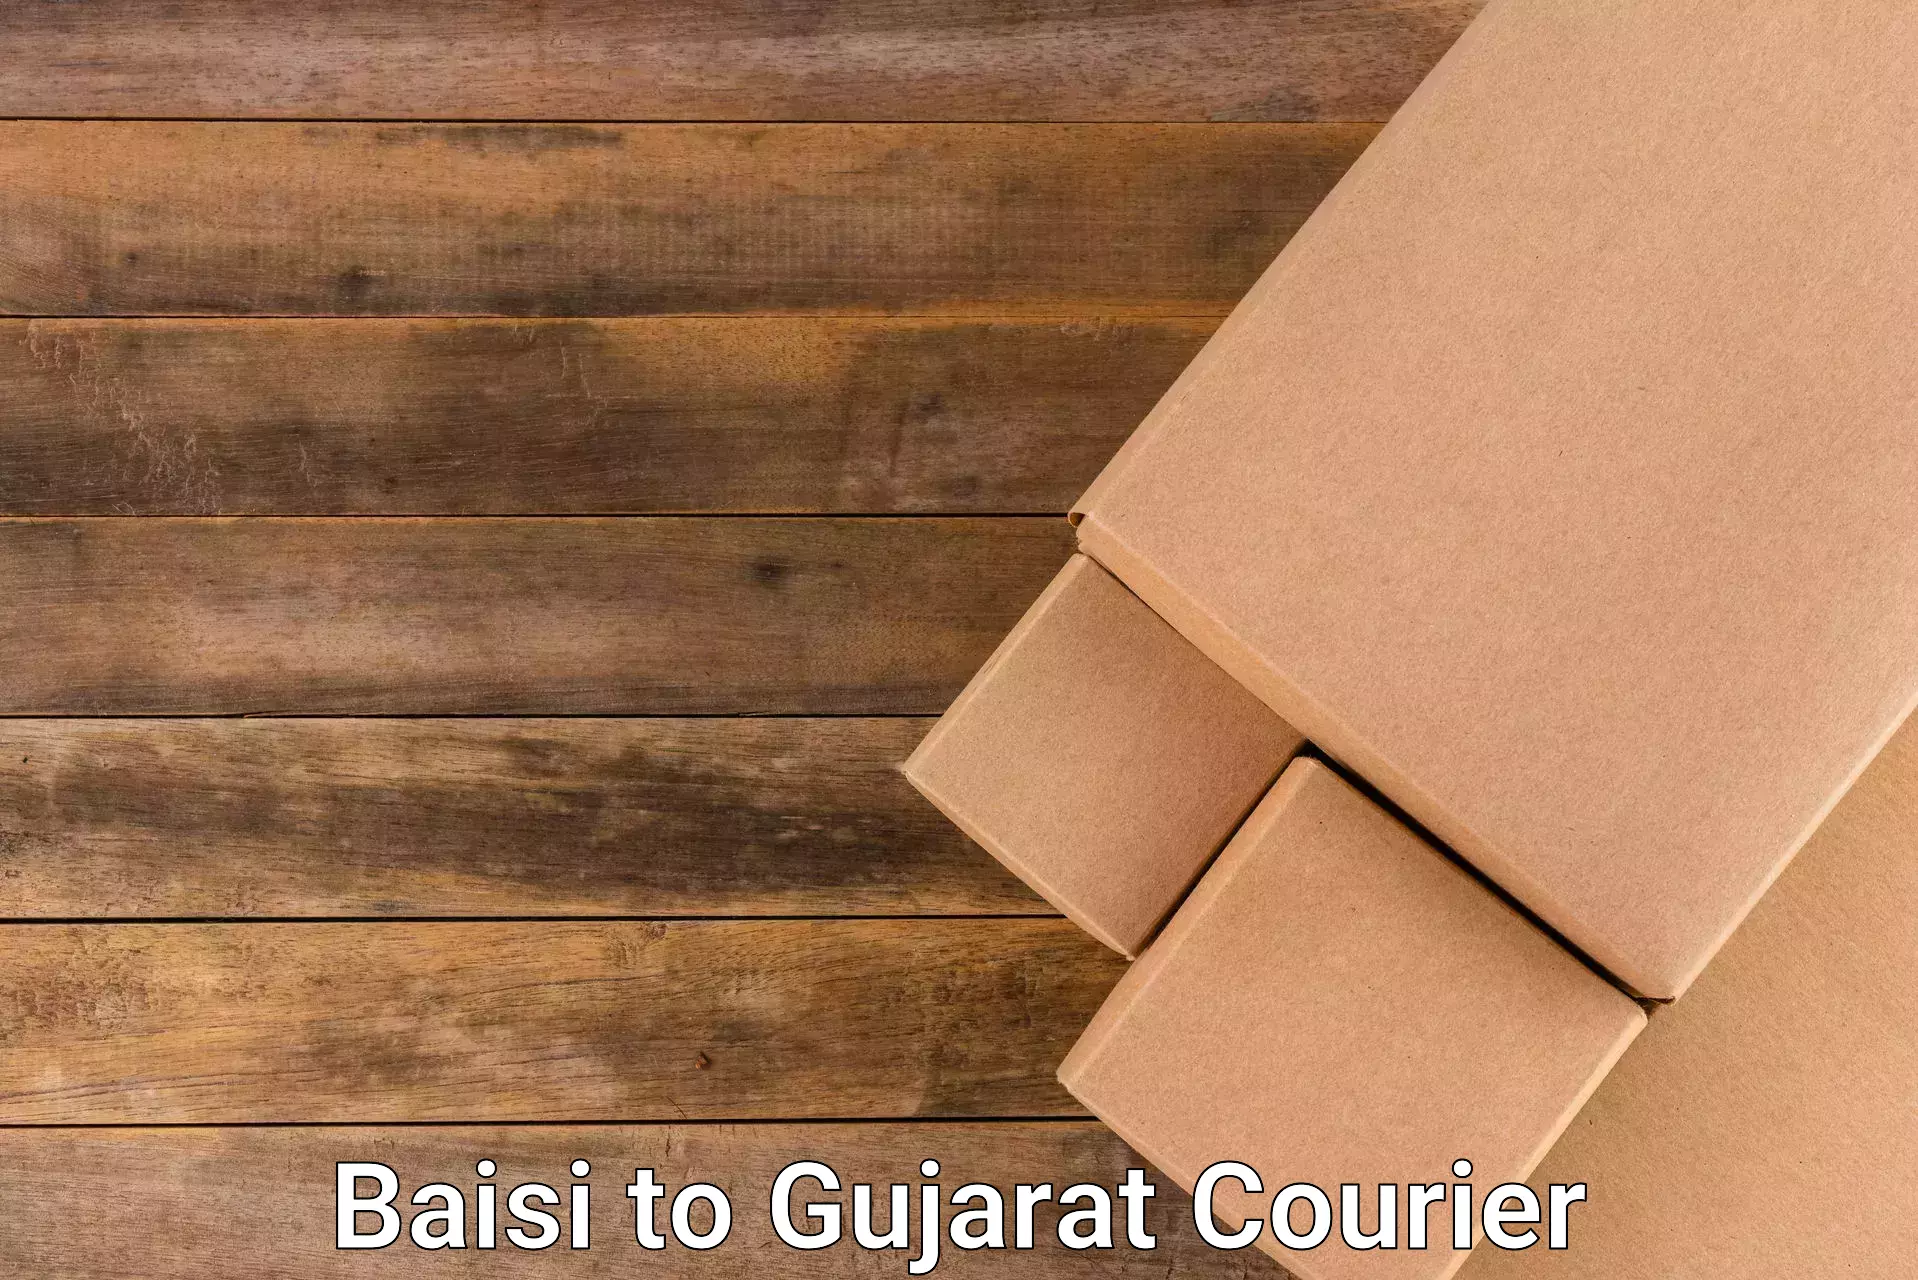 Nationwide delivery network Baisi to Gujarat